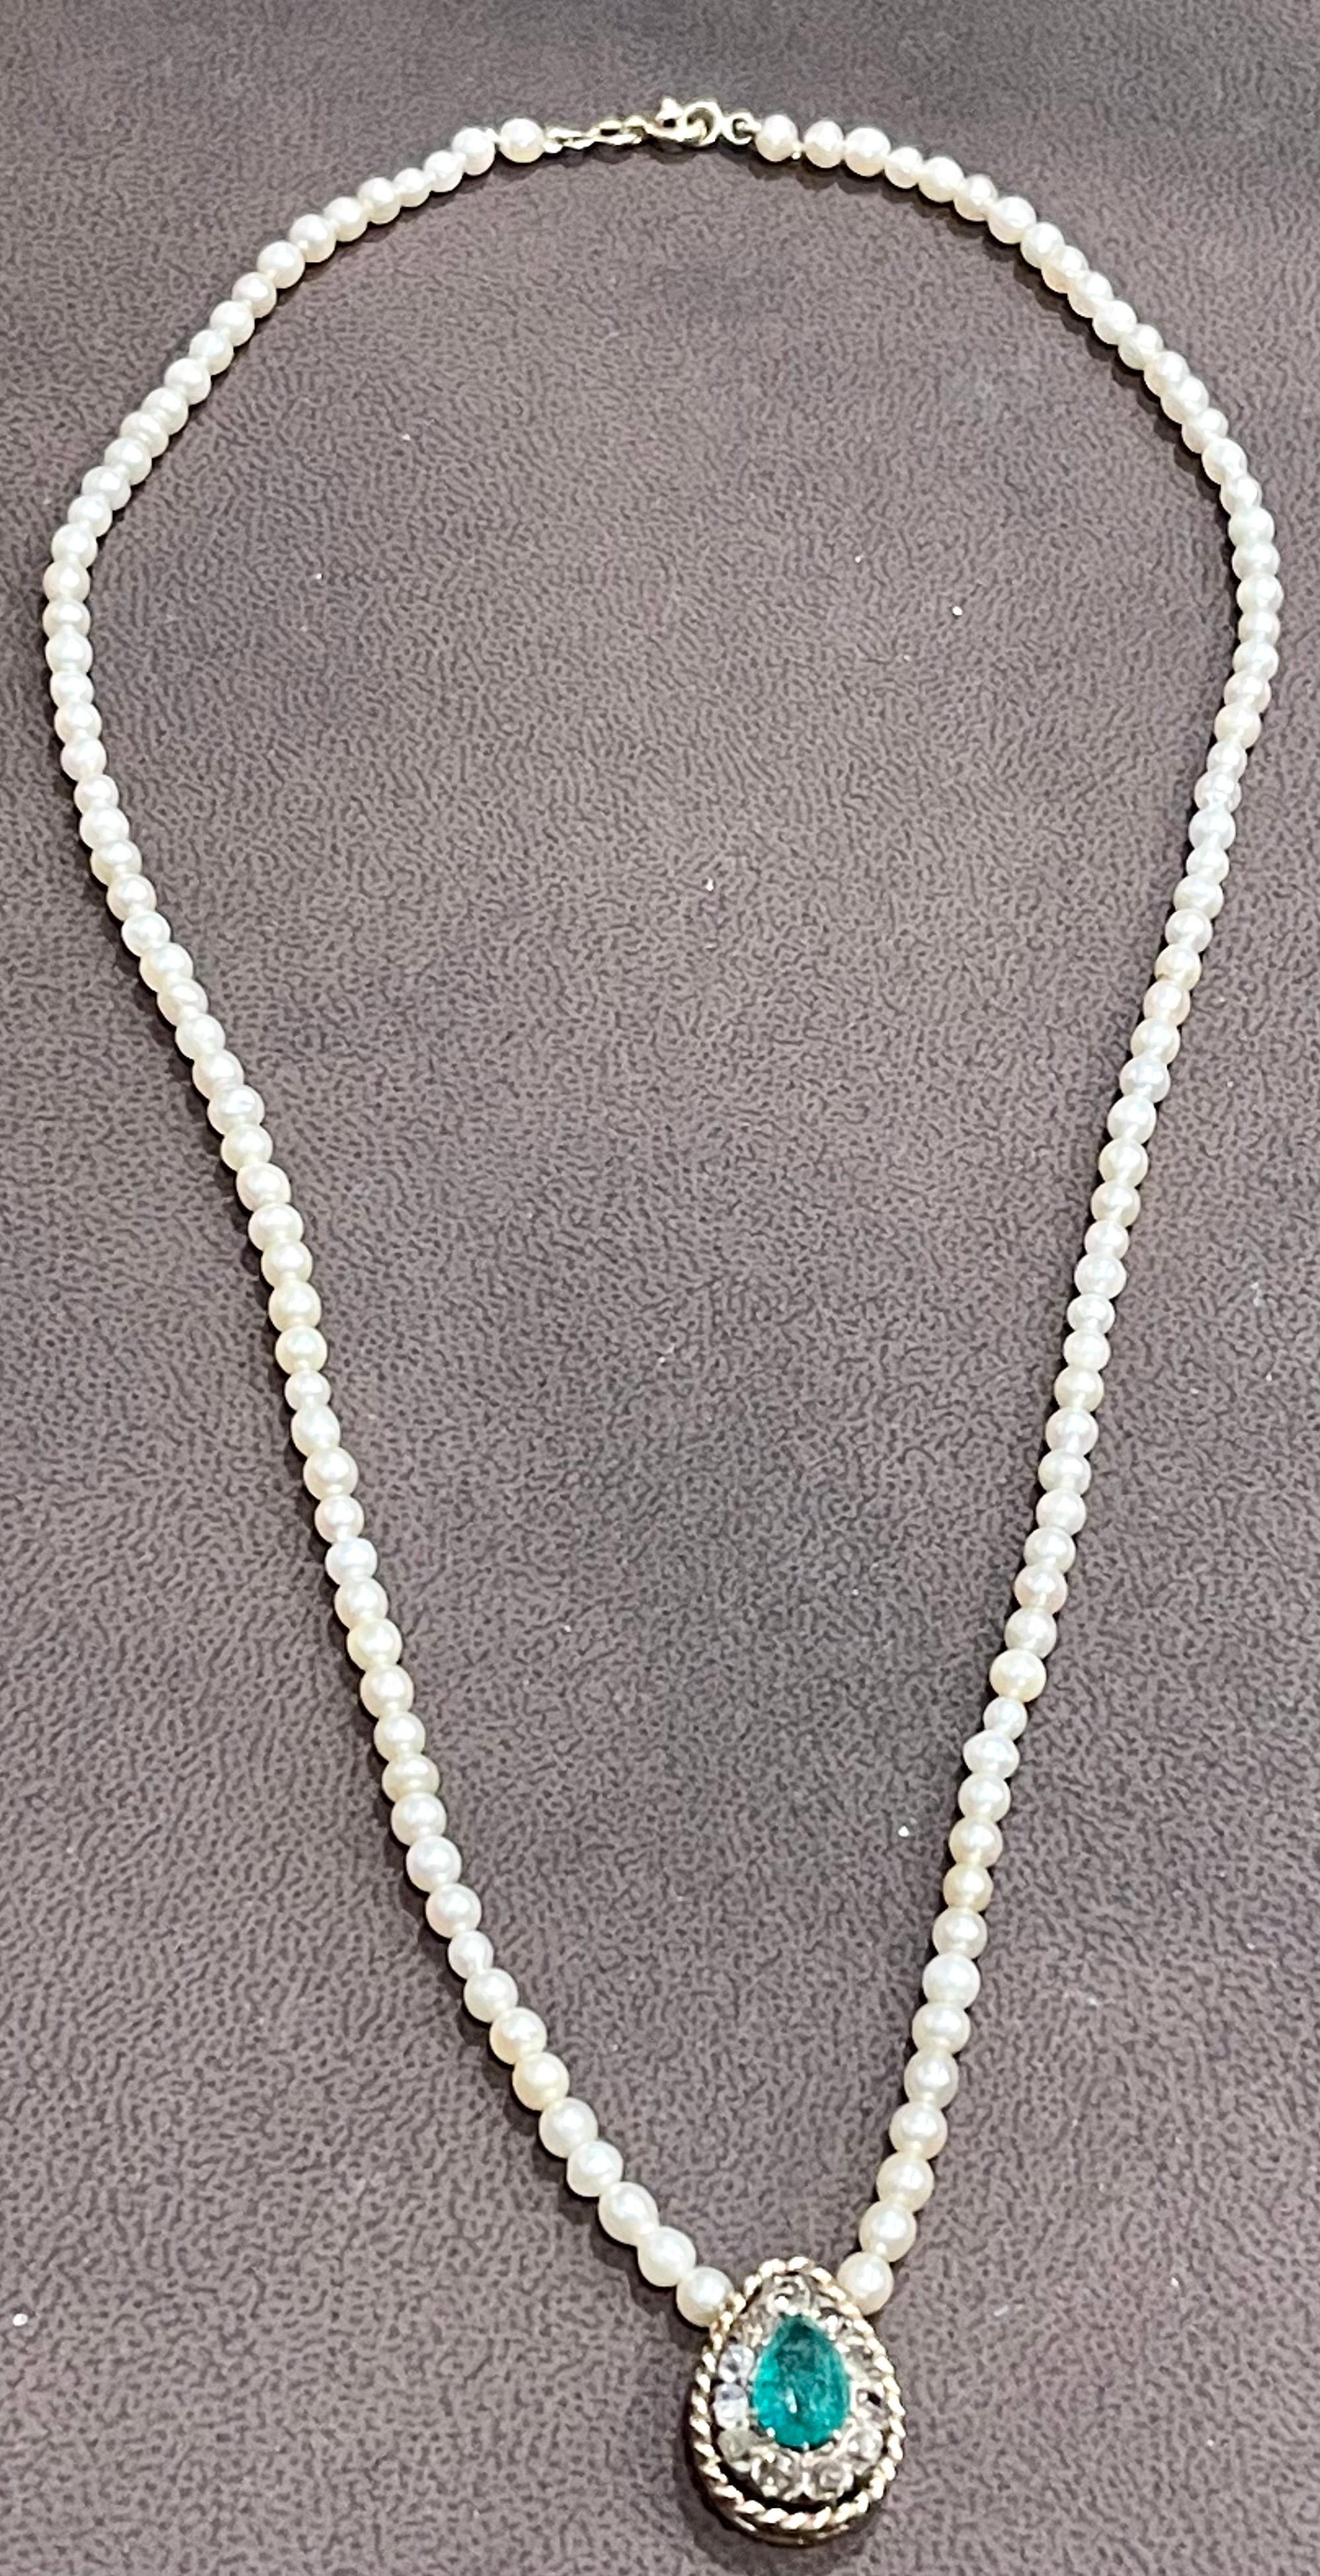 120 Years Old GIA Certified Natural Basra Pearls & Emerald Necklace 14KY Gold For Sale 7